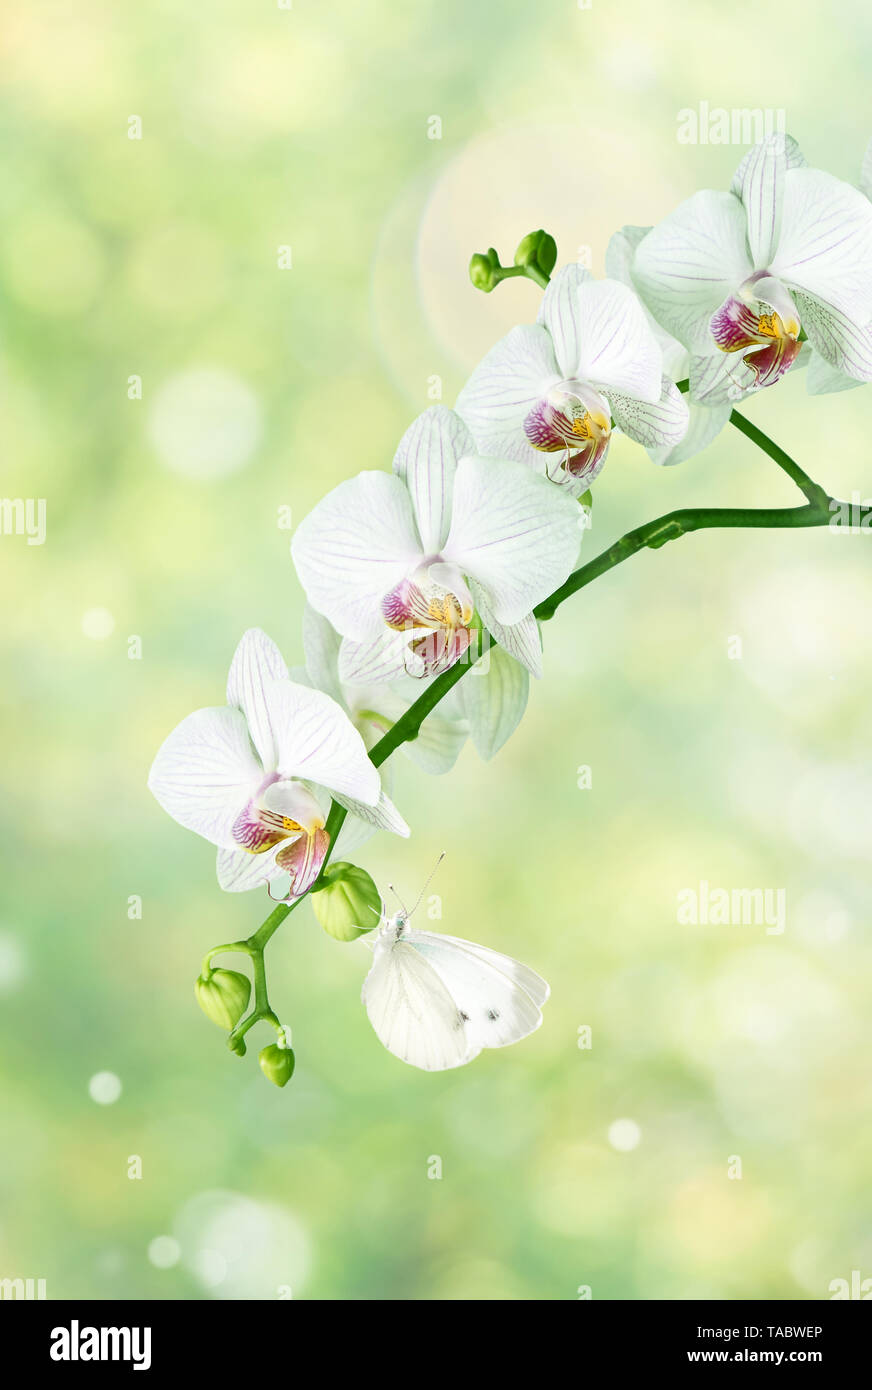 Beautiful white phalaenopsis orchid flowers and butterfly on the blurred abstract natural yellow-green background with bokeh Stock Photo